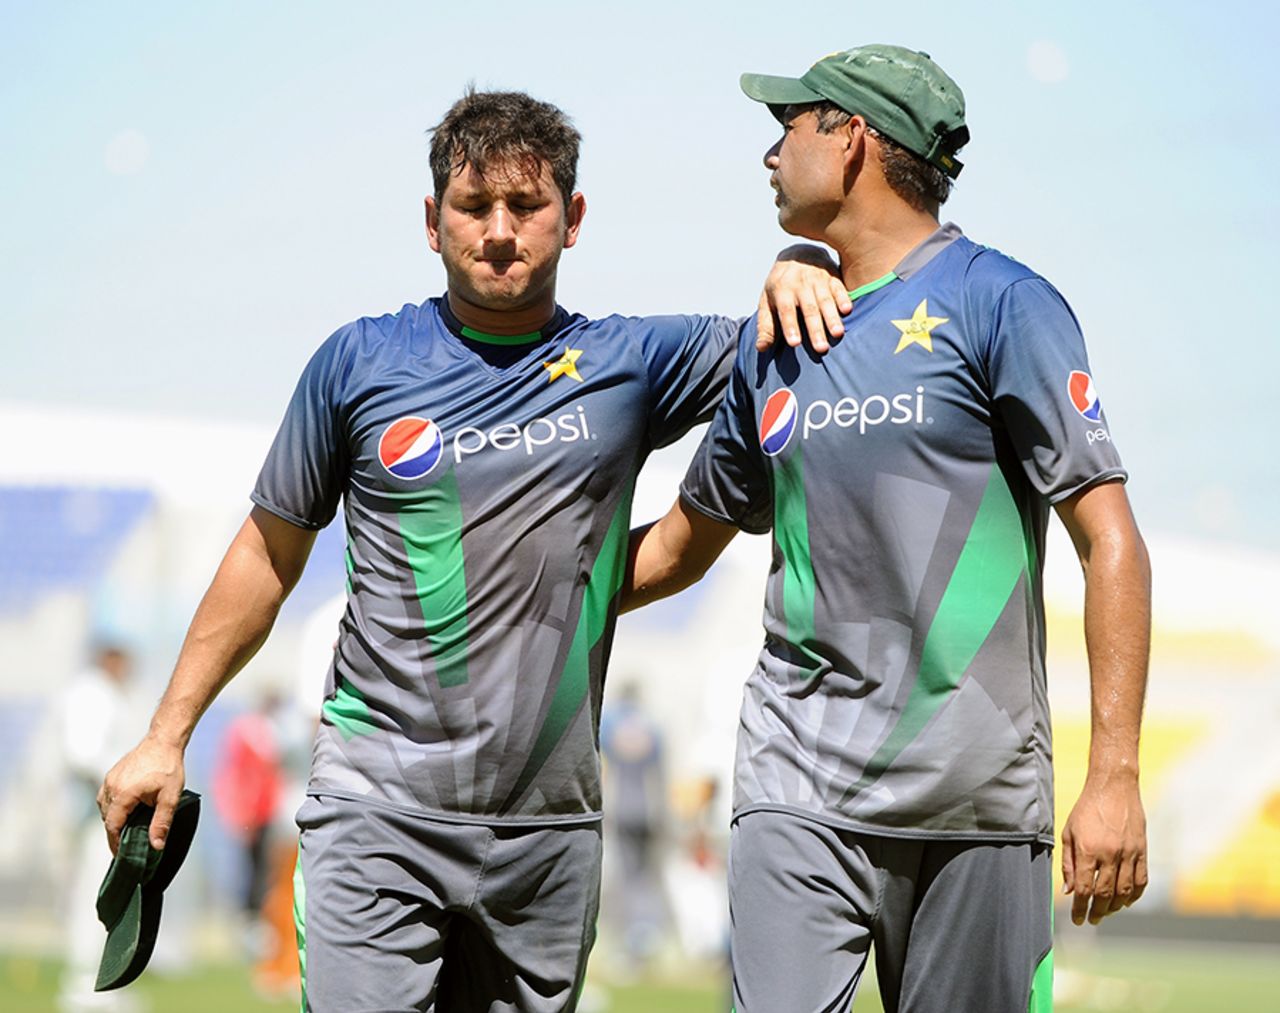 Yasir Shah walks off the field in discomfort during a training session, Abu Dhabi, October 12, 2015